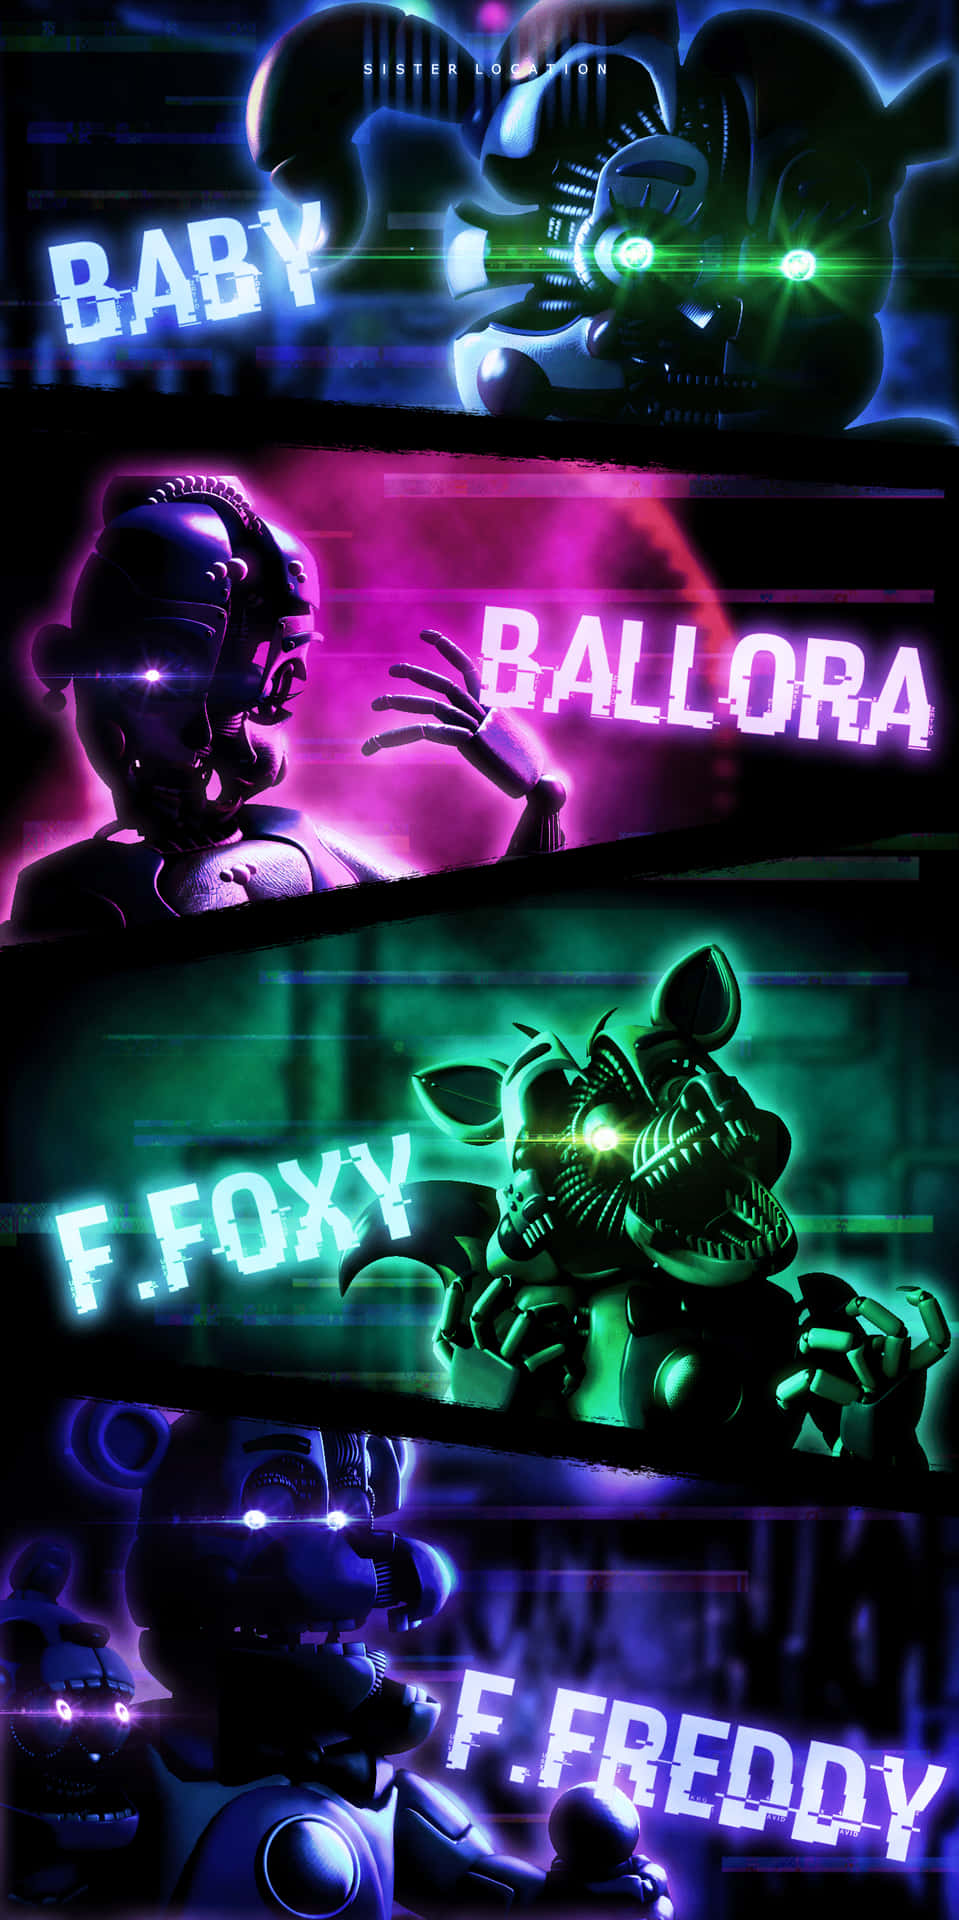 Five Nights At Freddy's Is Making Our Days Cuter!